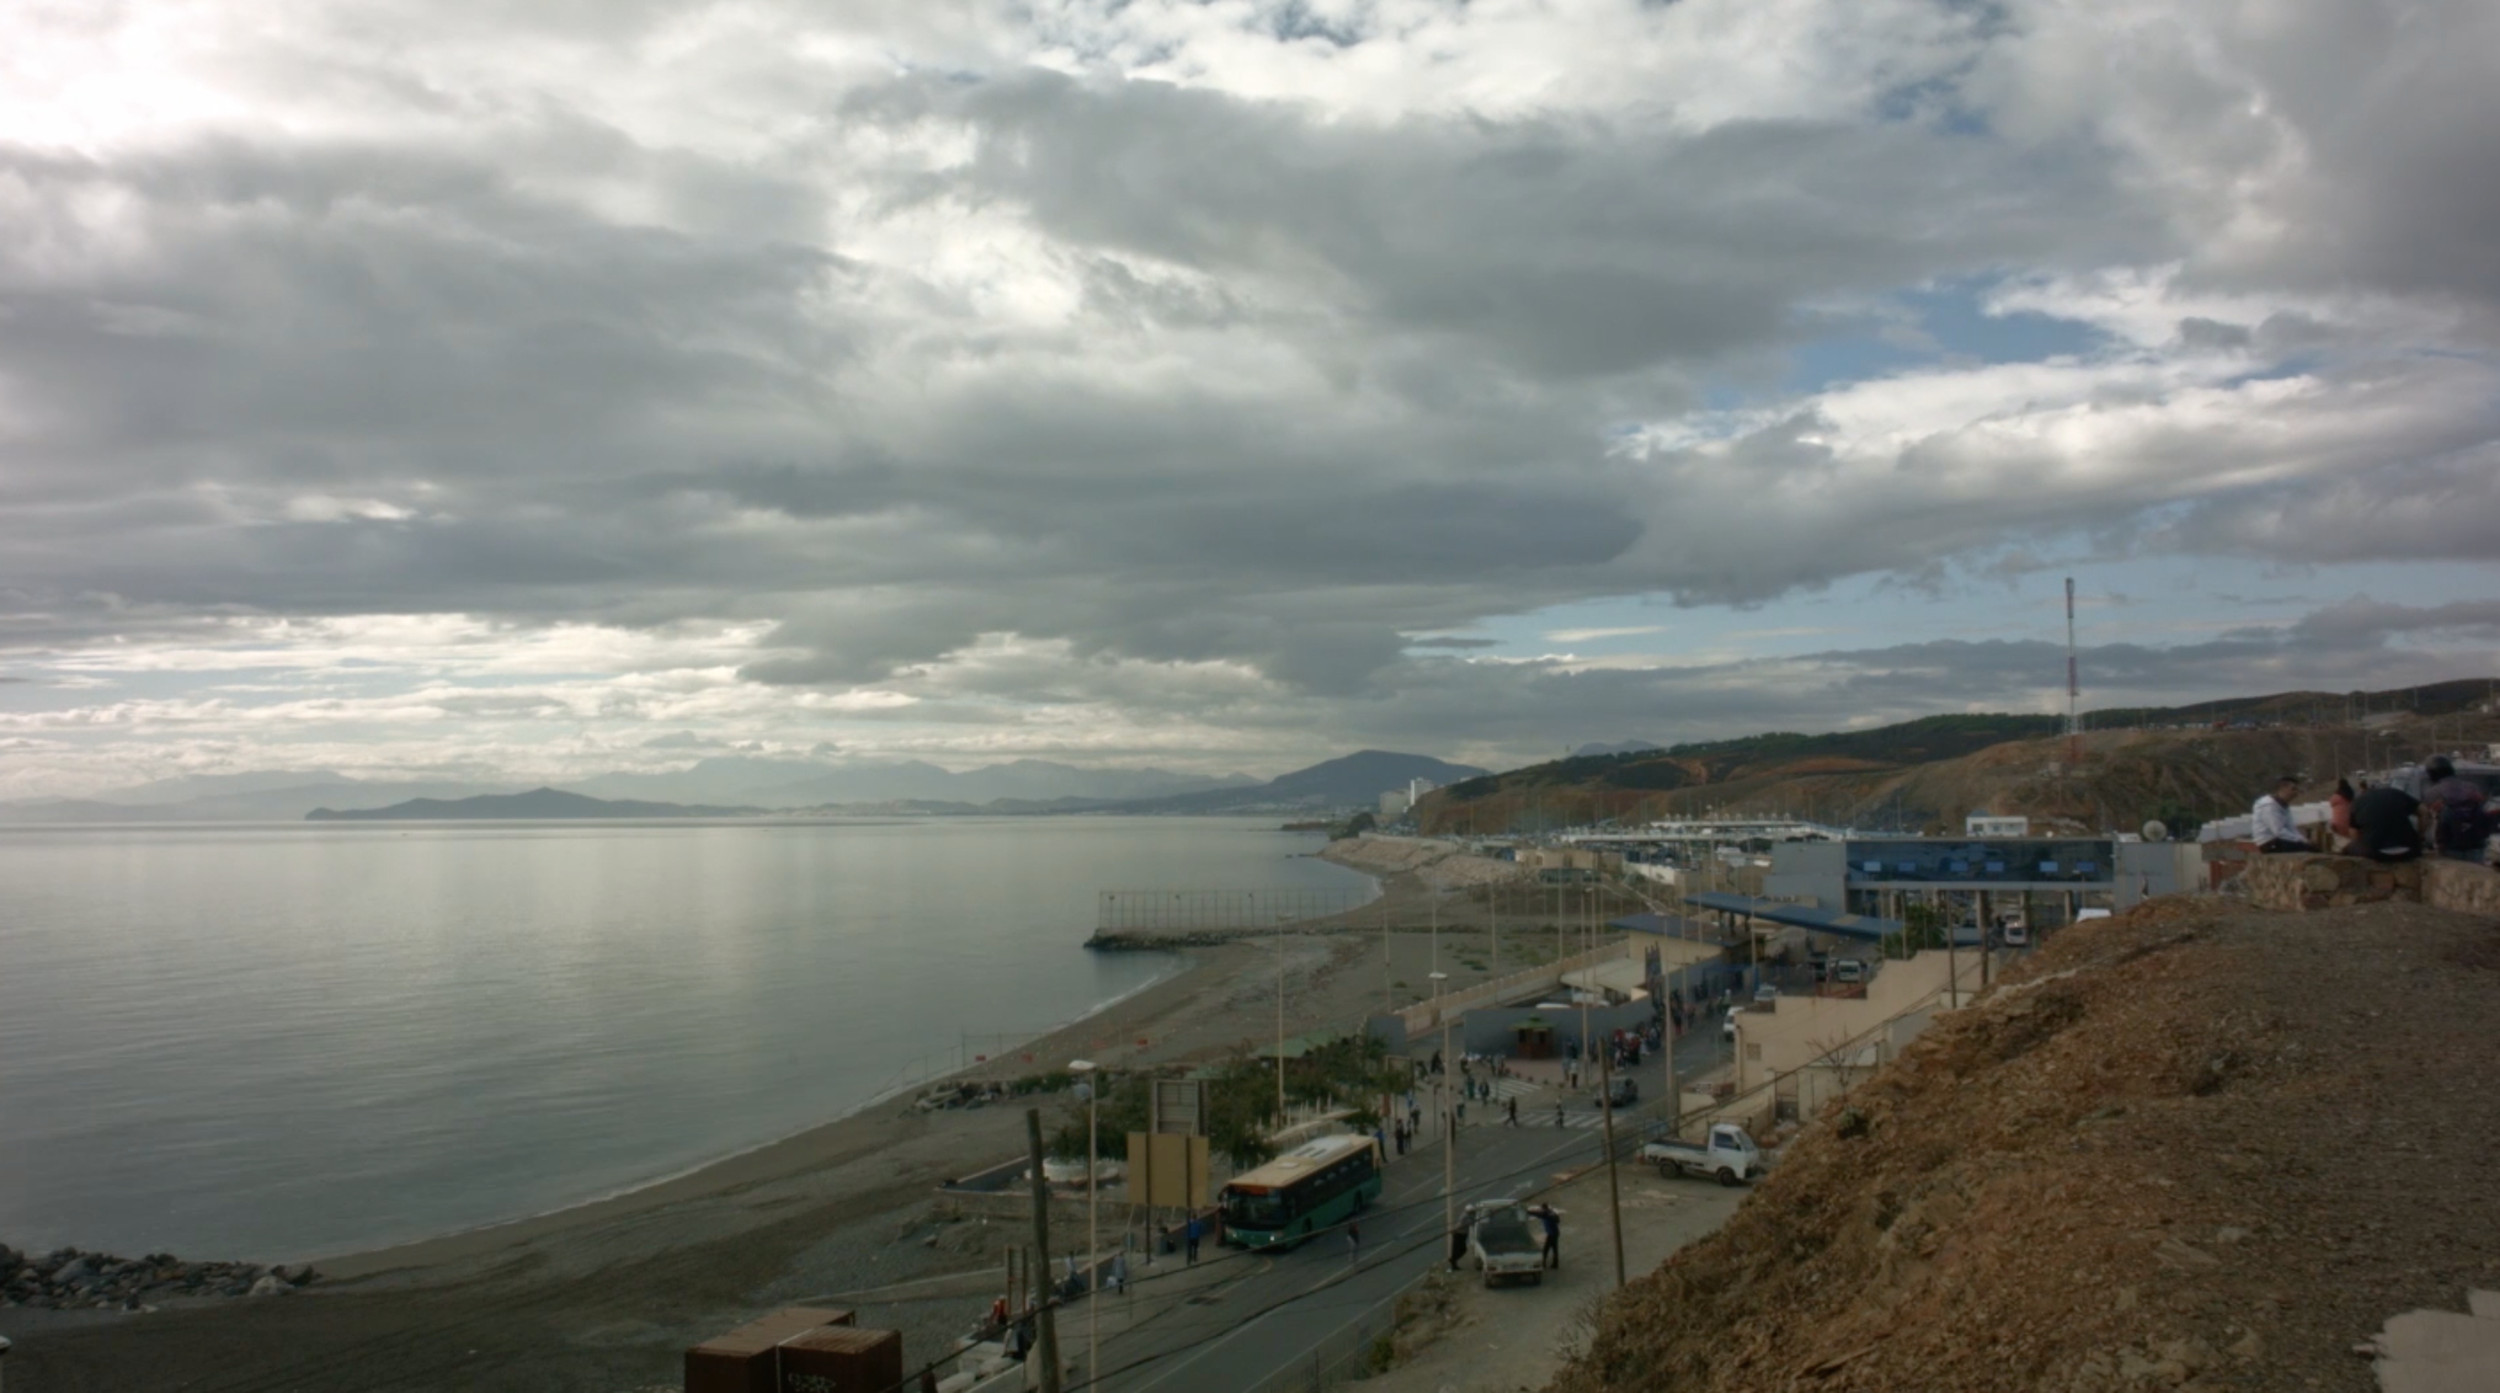 Image of Ceuta's beach in the border between Spain and Morocco (by Metromuster)